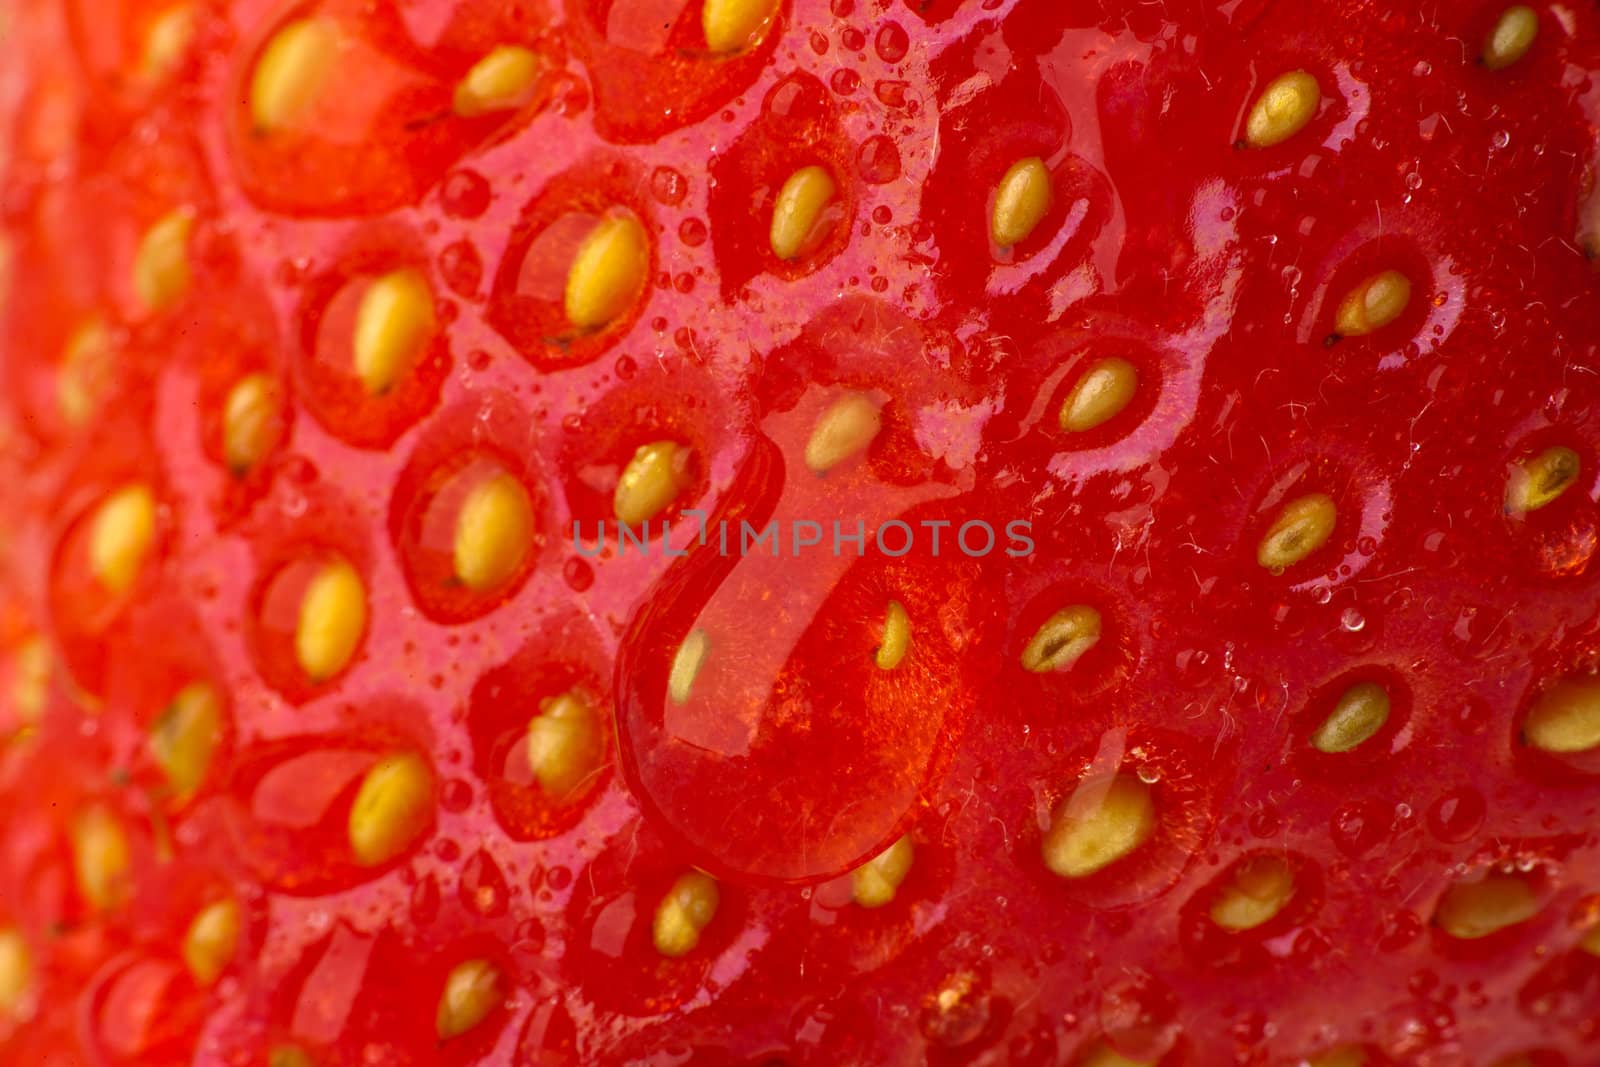 Very close-up of strawberries with drops of dew